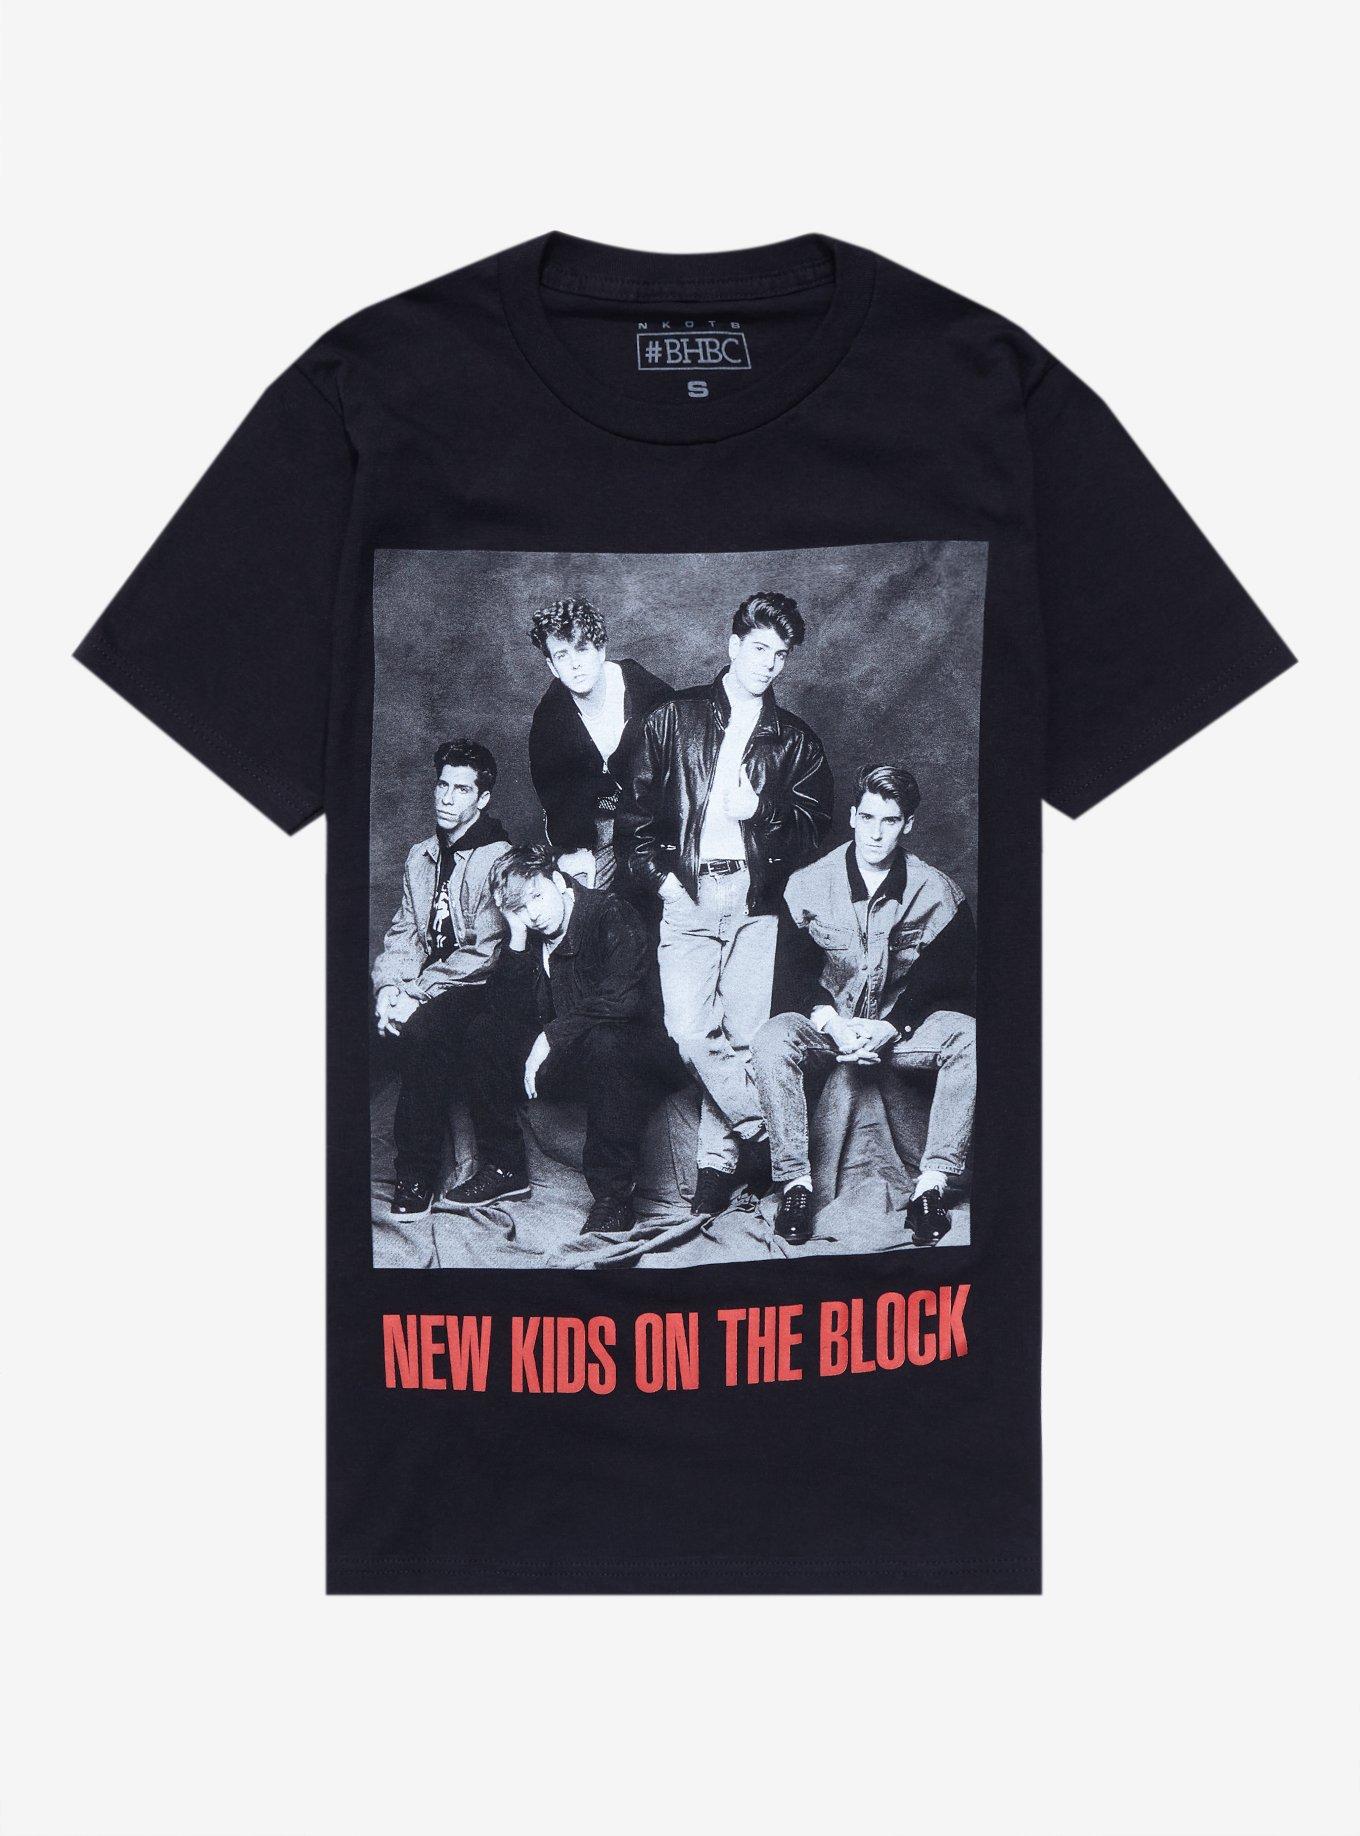 New Kids On The Block 1990 Step By Step Original Store Promo Poster II